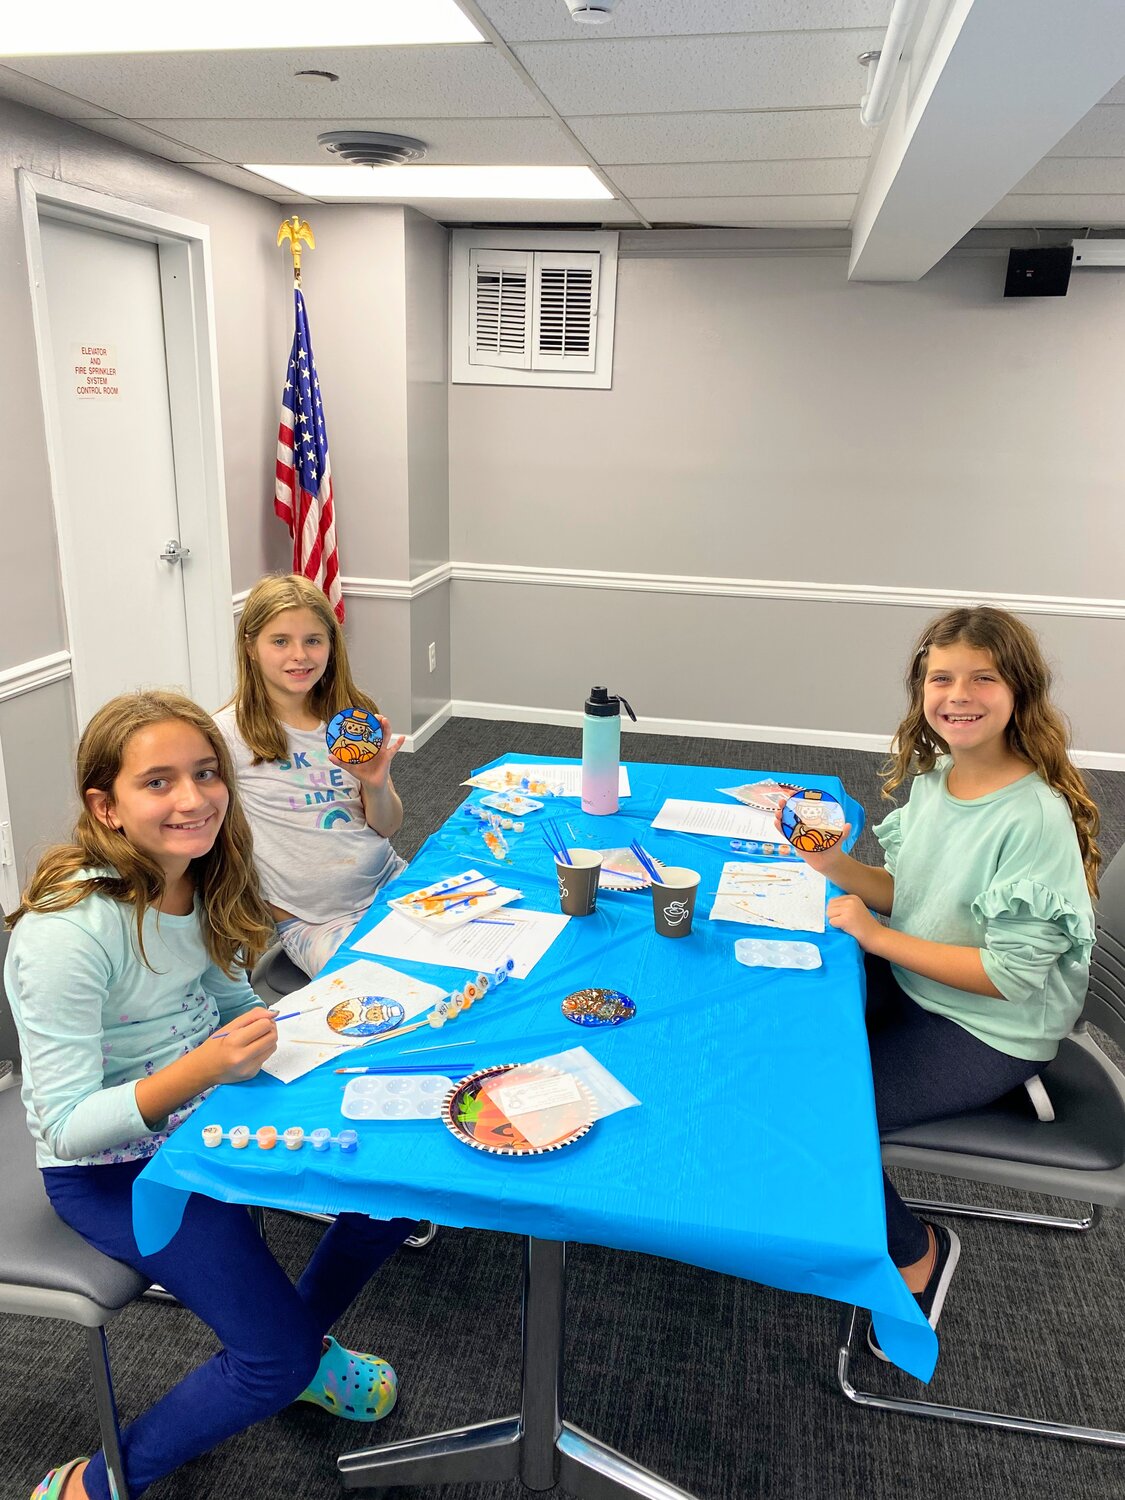 From left, 10-year-olds A.J. Maresca, Sydney Kelly and Charlotte Hamel finish painting their suncatchers.